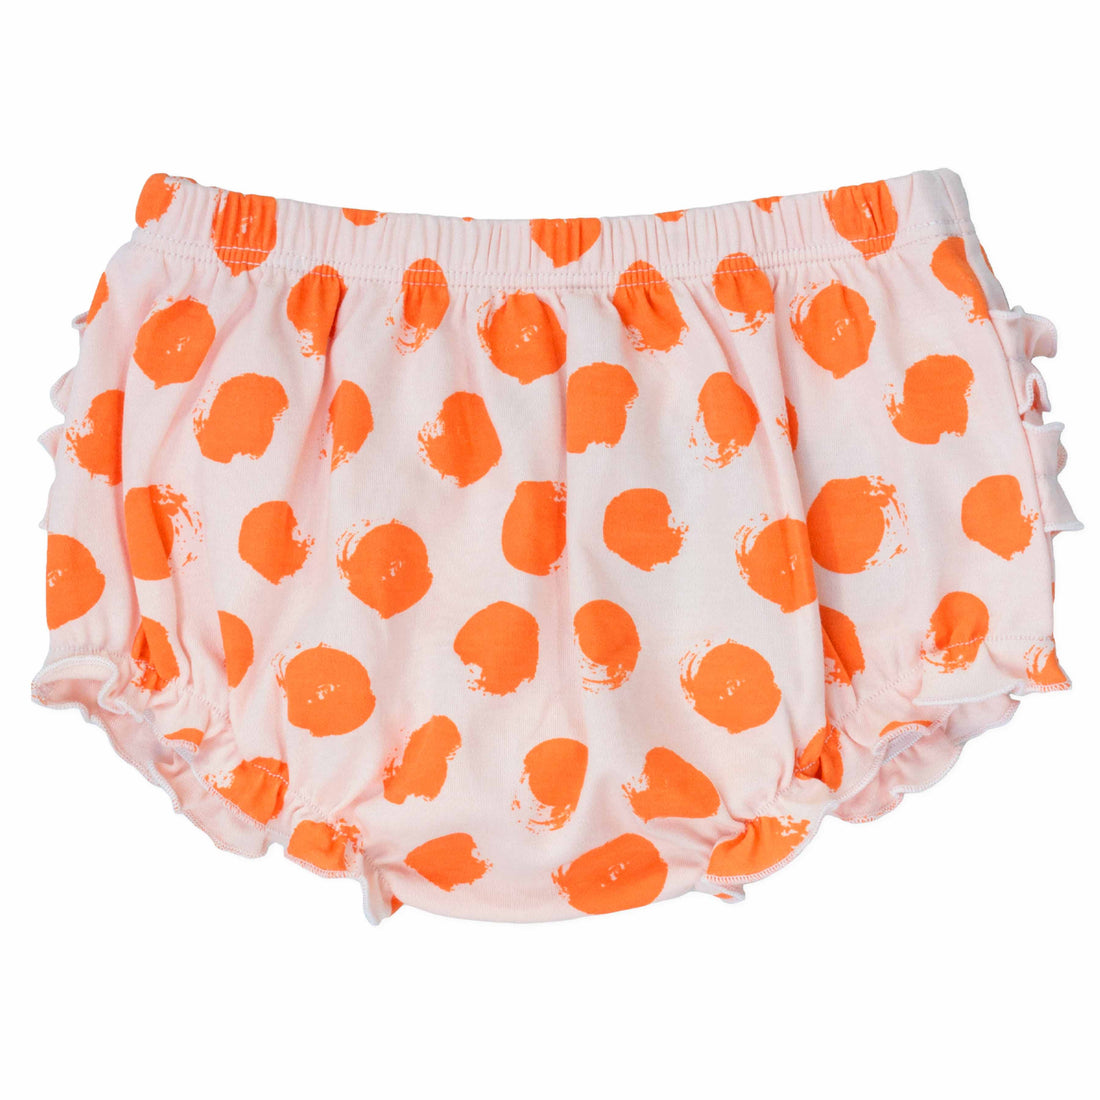 pink girls bloomer with orange dots pattern made in pima cotton